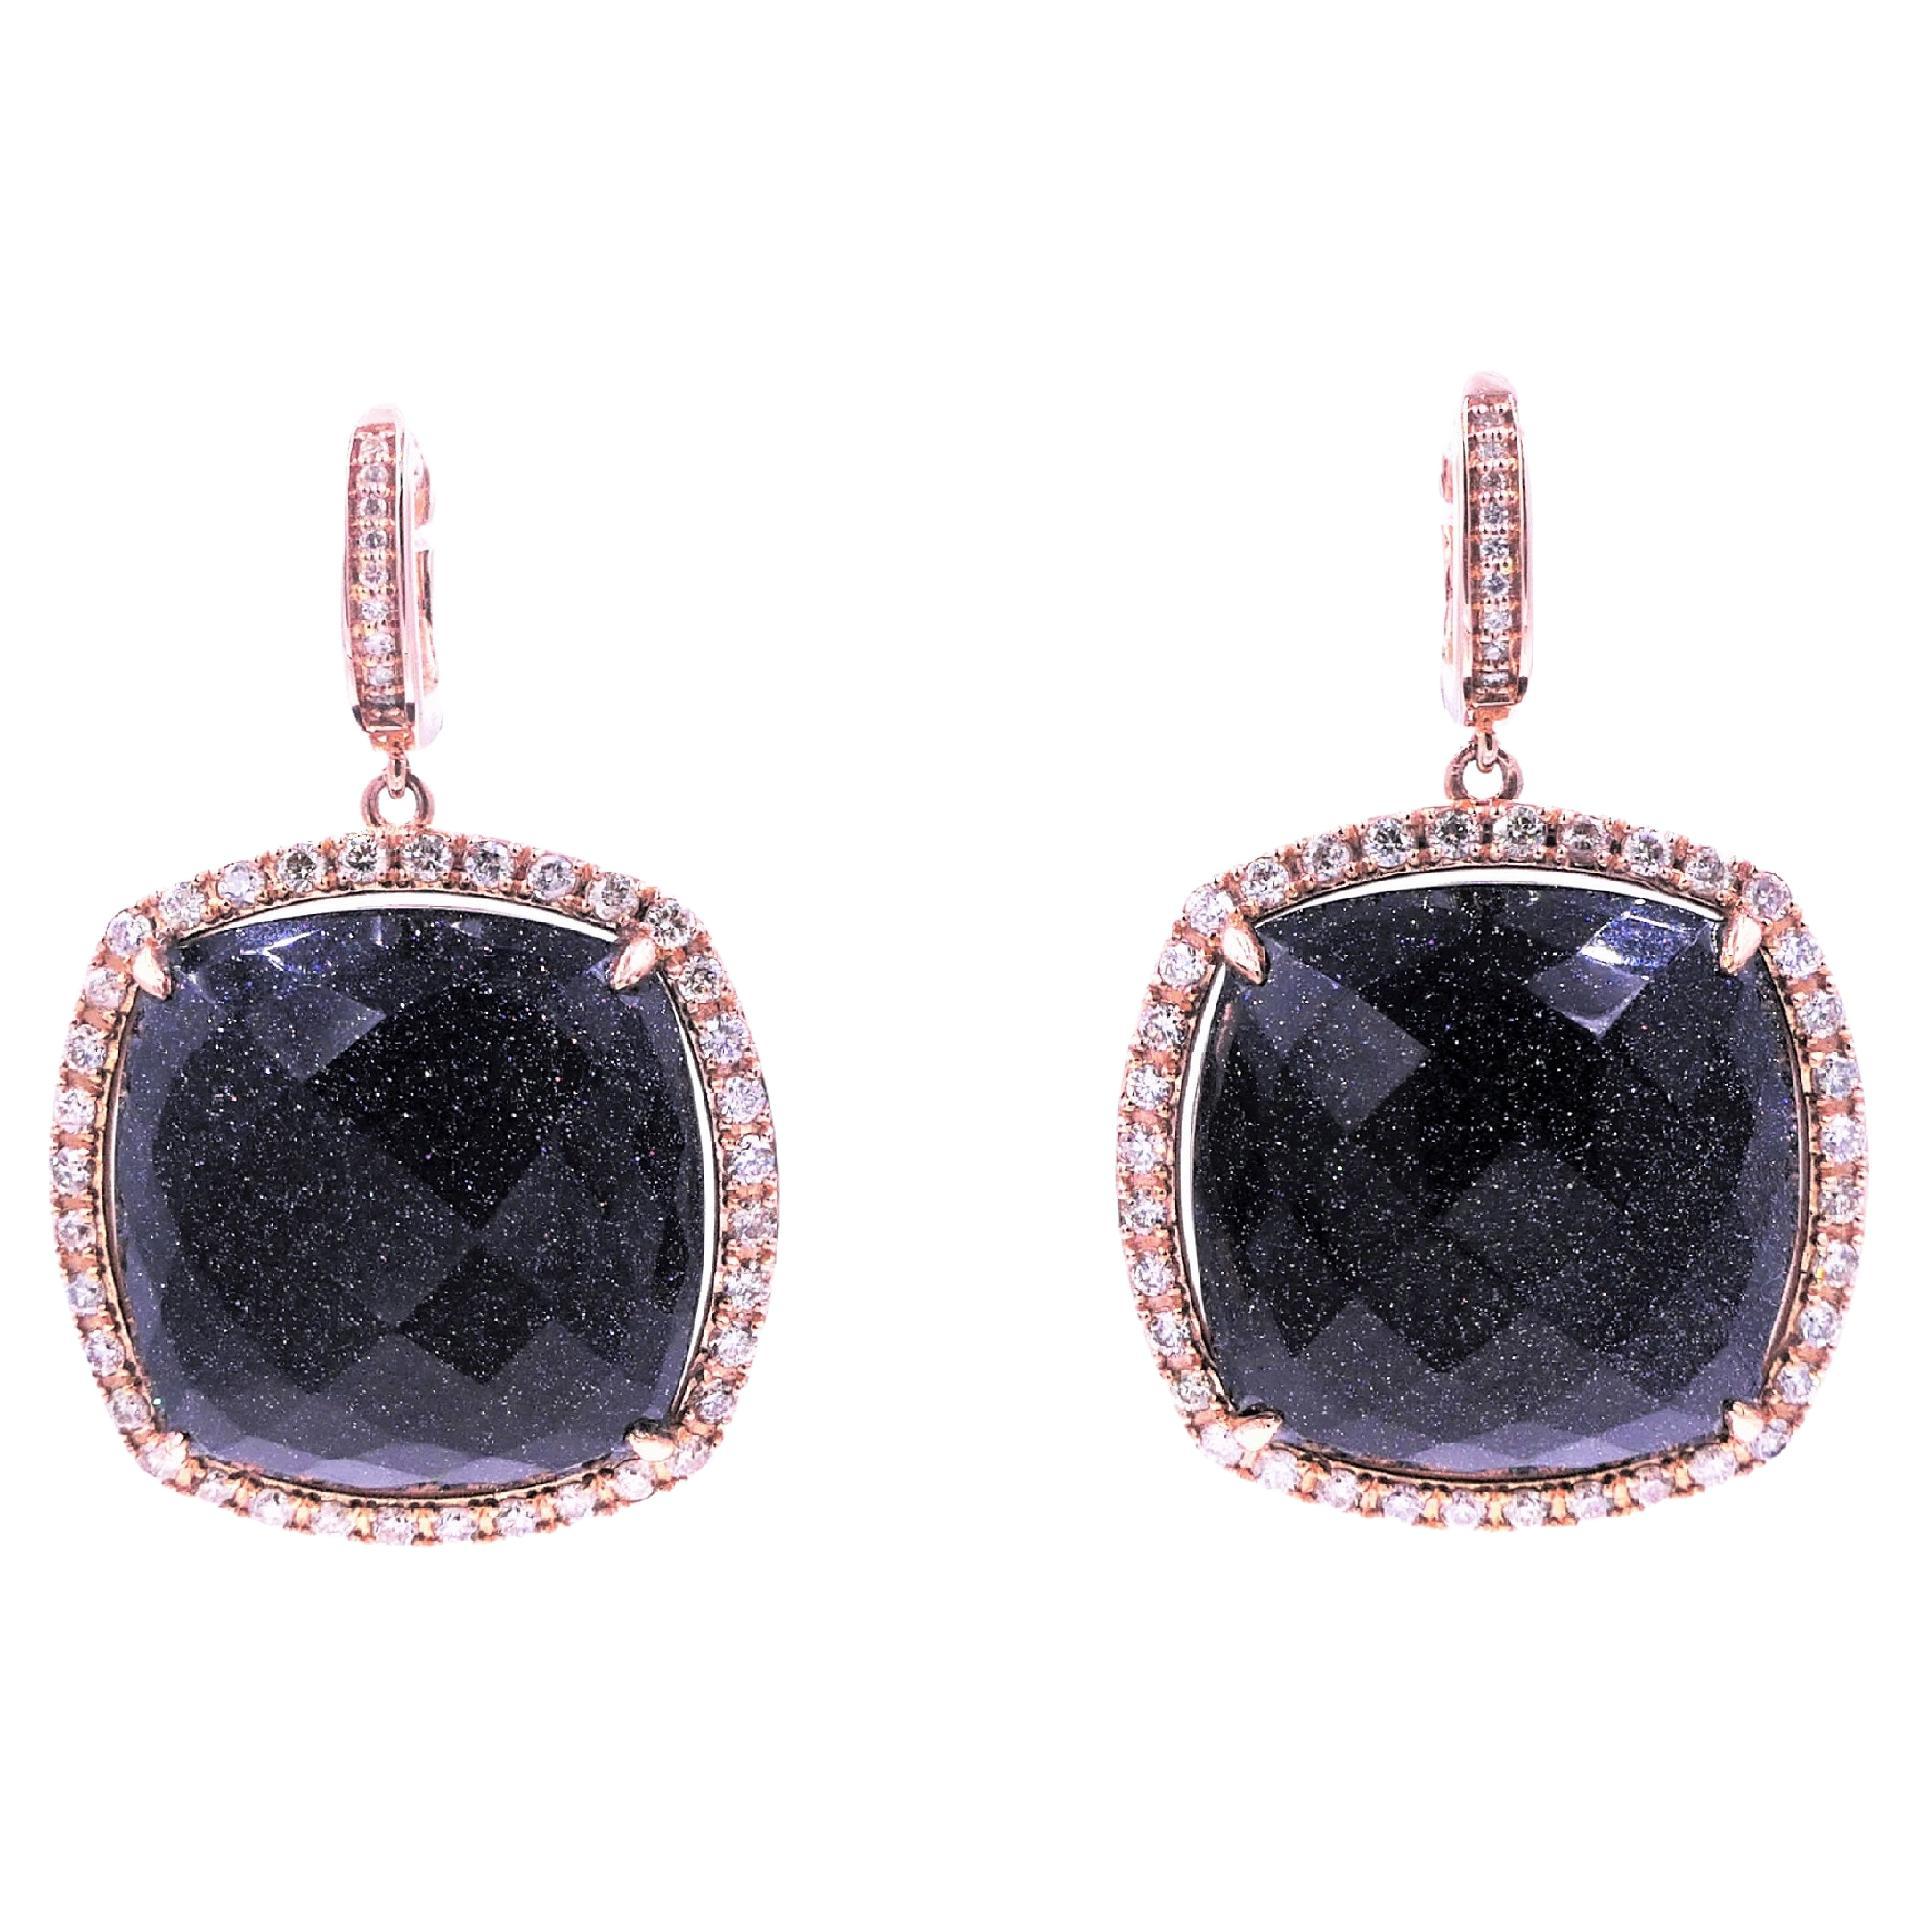 Black Aventurine Faceted Cushion Cabochon Diamond Halo Rose Gold Drop Earrings
14 Karat Rose Gold
2.00 CT Diamonds
Black Aventurine Cabochon Gemstones

Important Information:
Please note that this item will take 2-4 weeks to deliver - it is